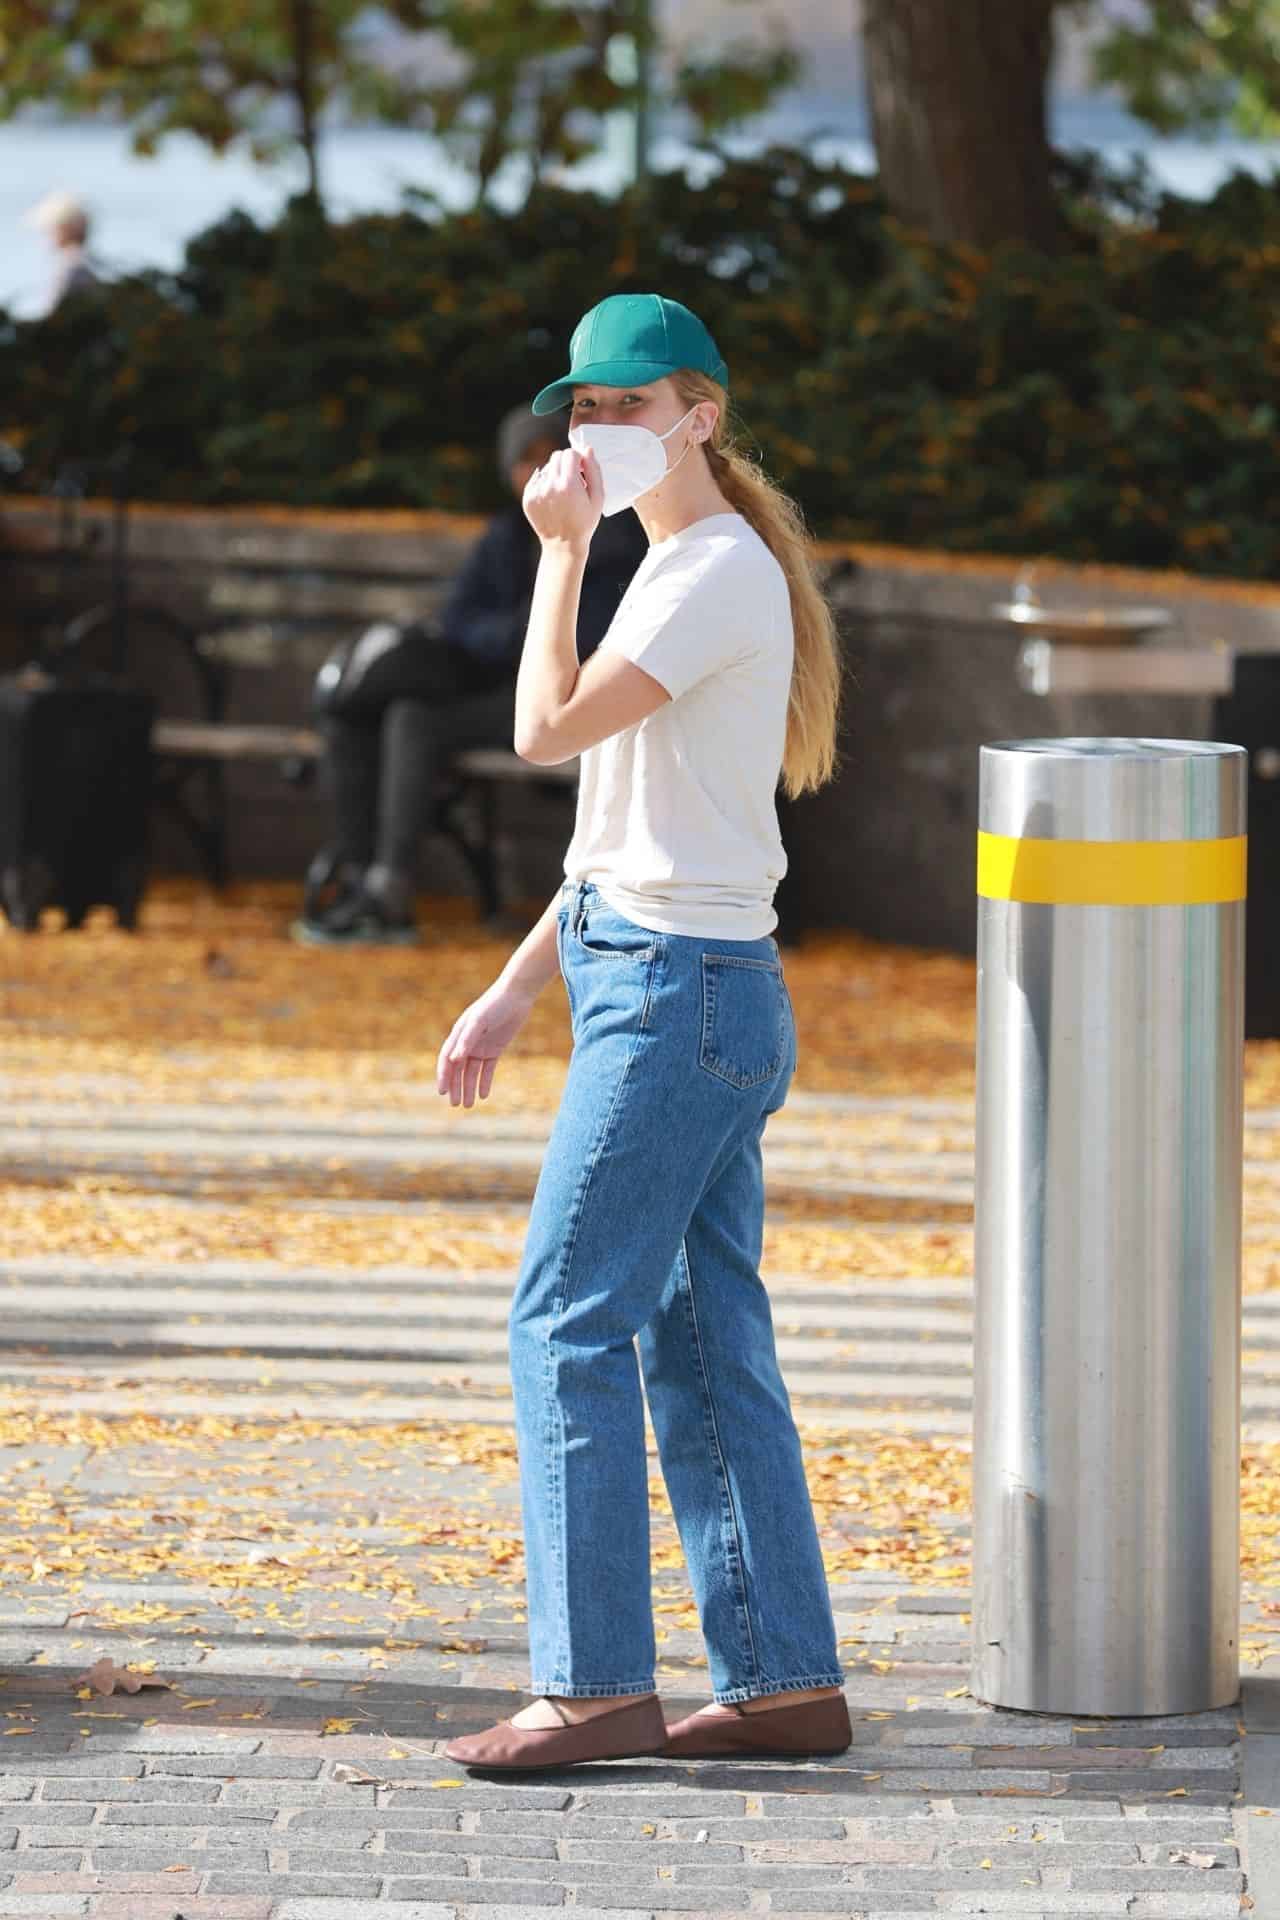 Jennifer Lawrence Sports a Casual Look During a Family Stroll in NYC